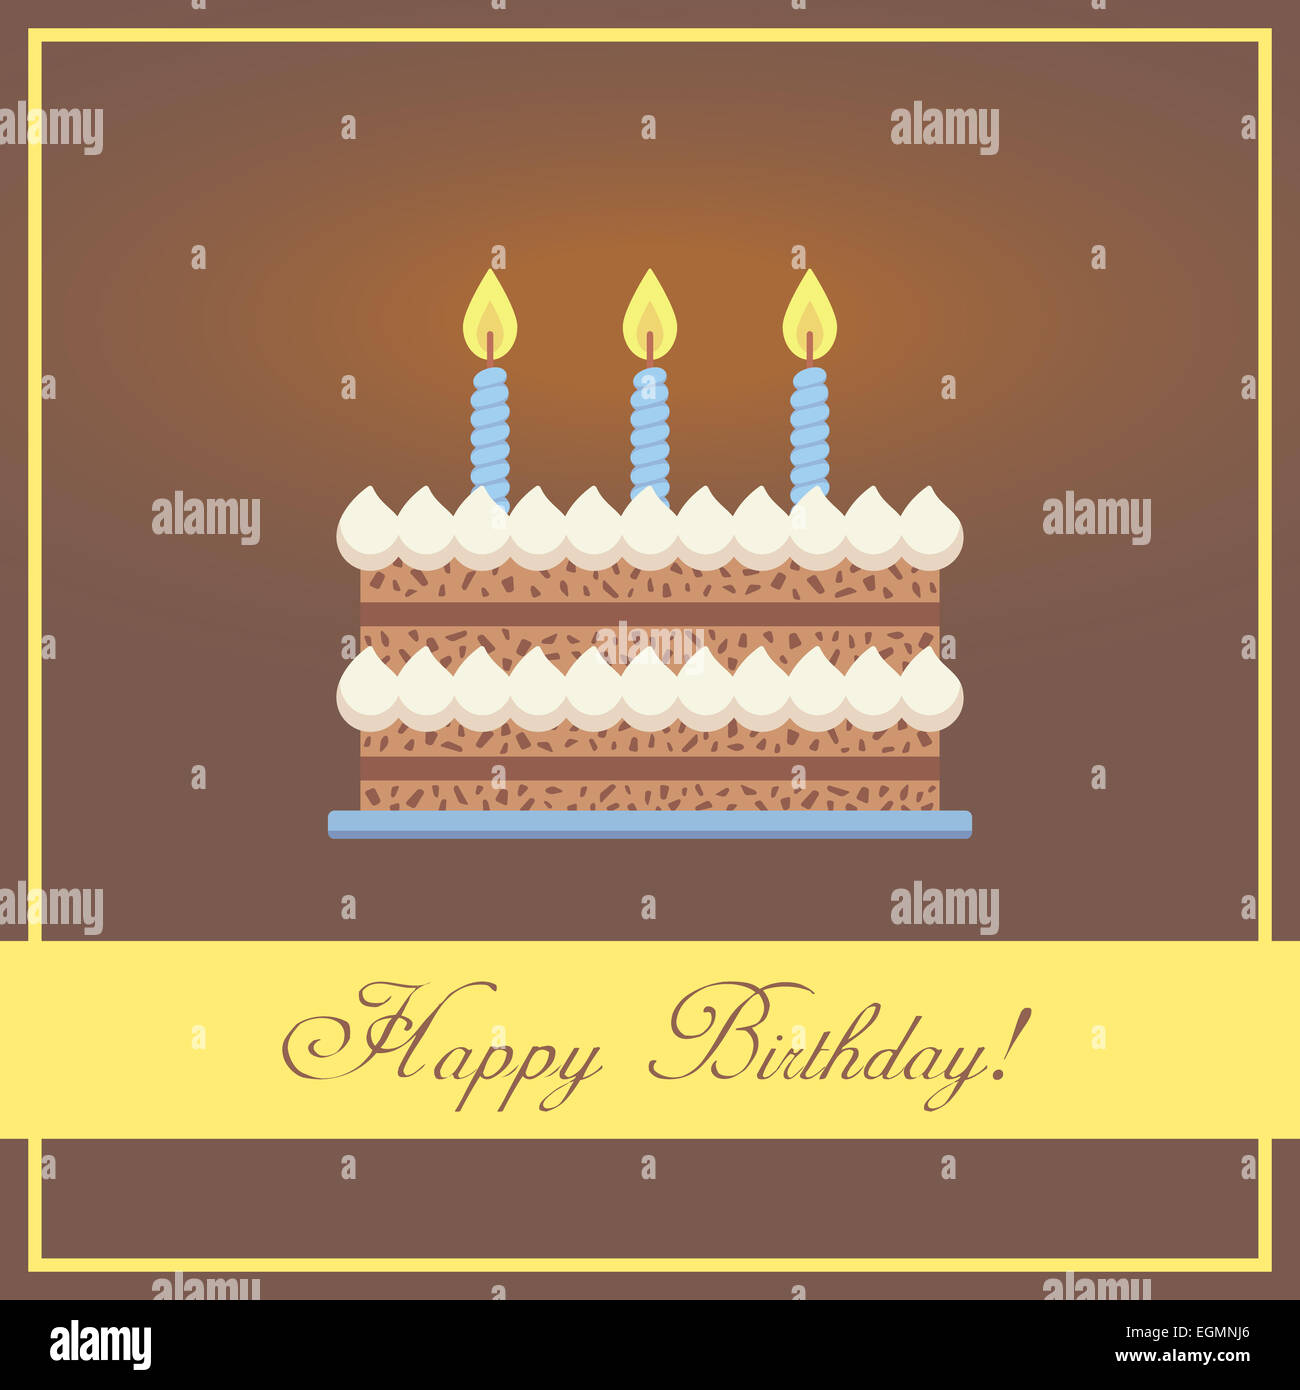 Flat Design Happy Birthday Greeting Card with Chocolate Cake, Whipped Cream and Blue Burning Candles Placed in Abstract Frame Plus Congratulation Words on Brown Background Stock Photo